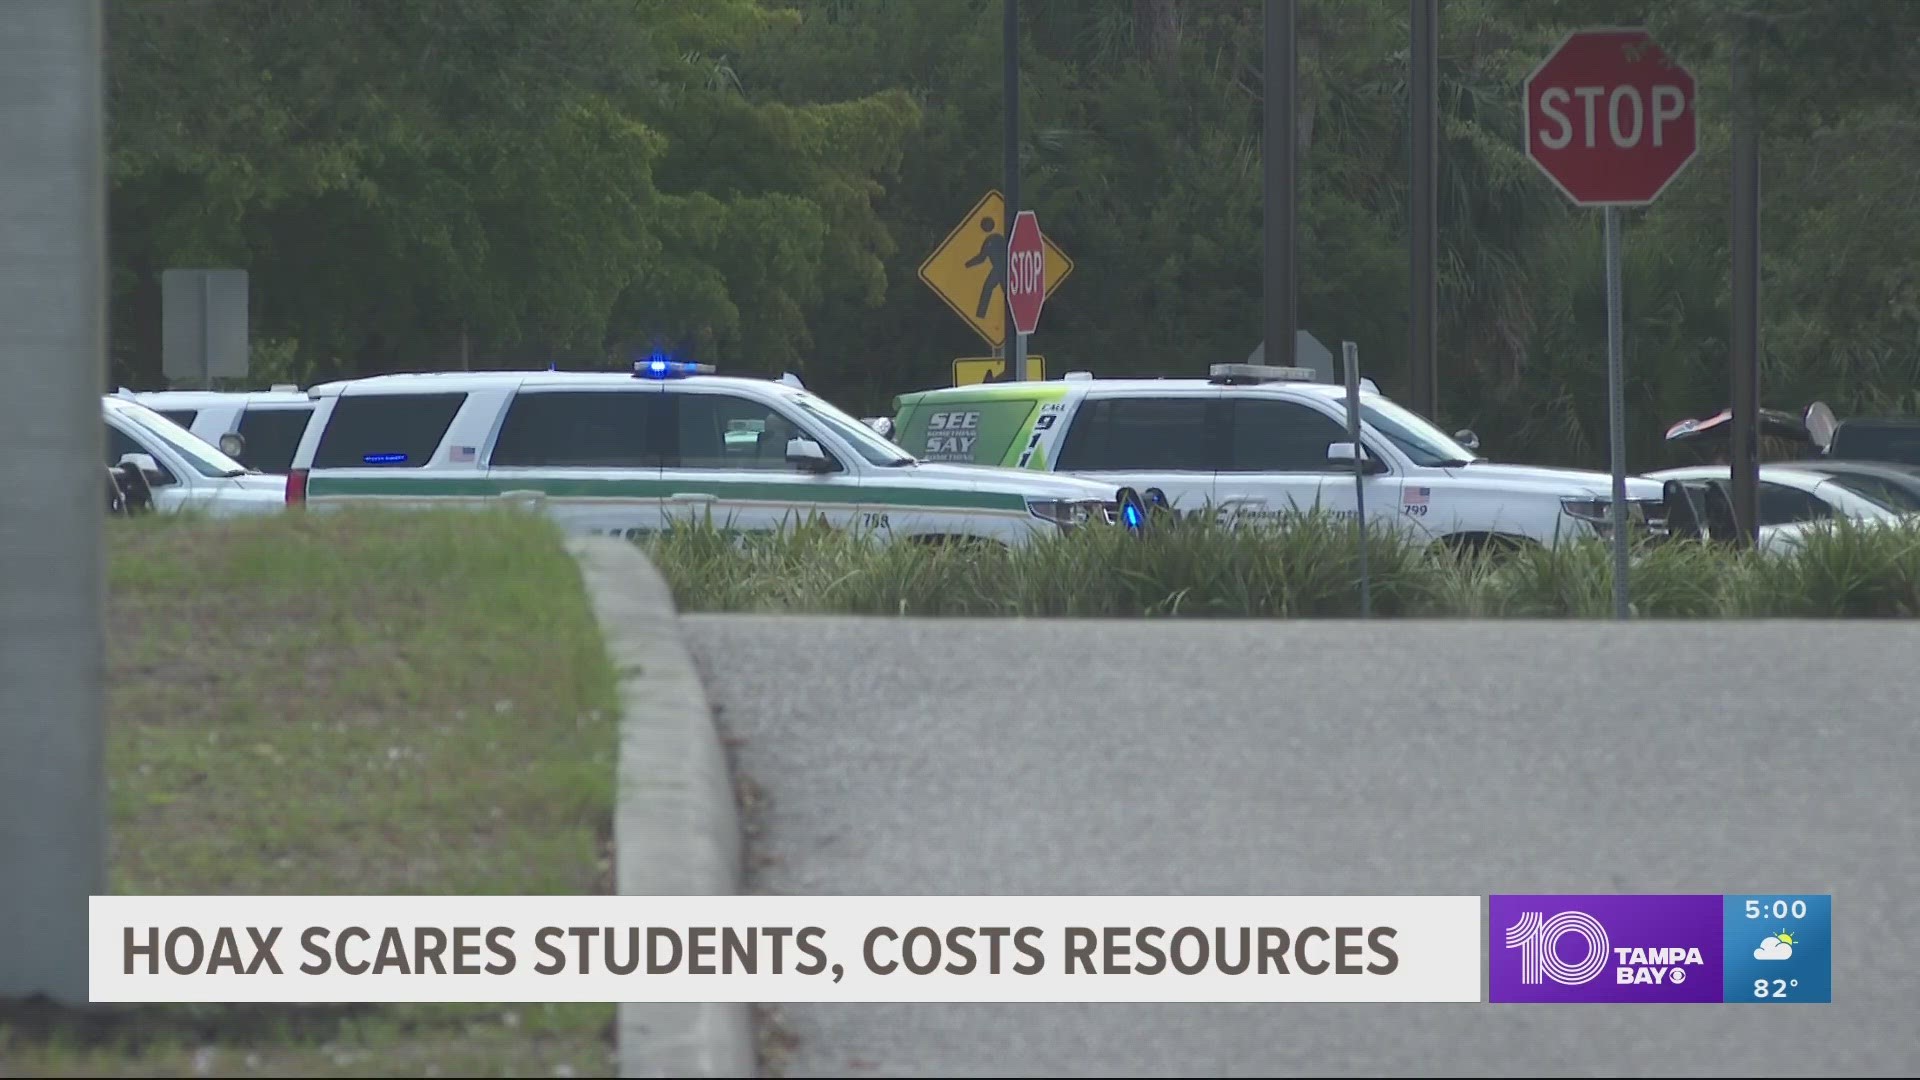 Similar false active shooter calls were reported at campuses across South Florida, including Florida International University and Indian River State College.